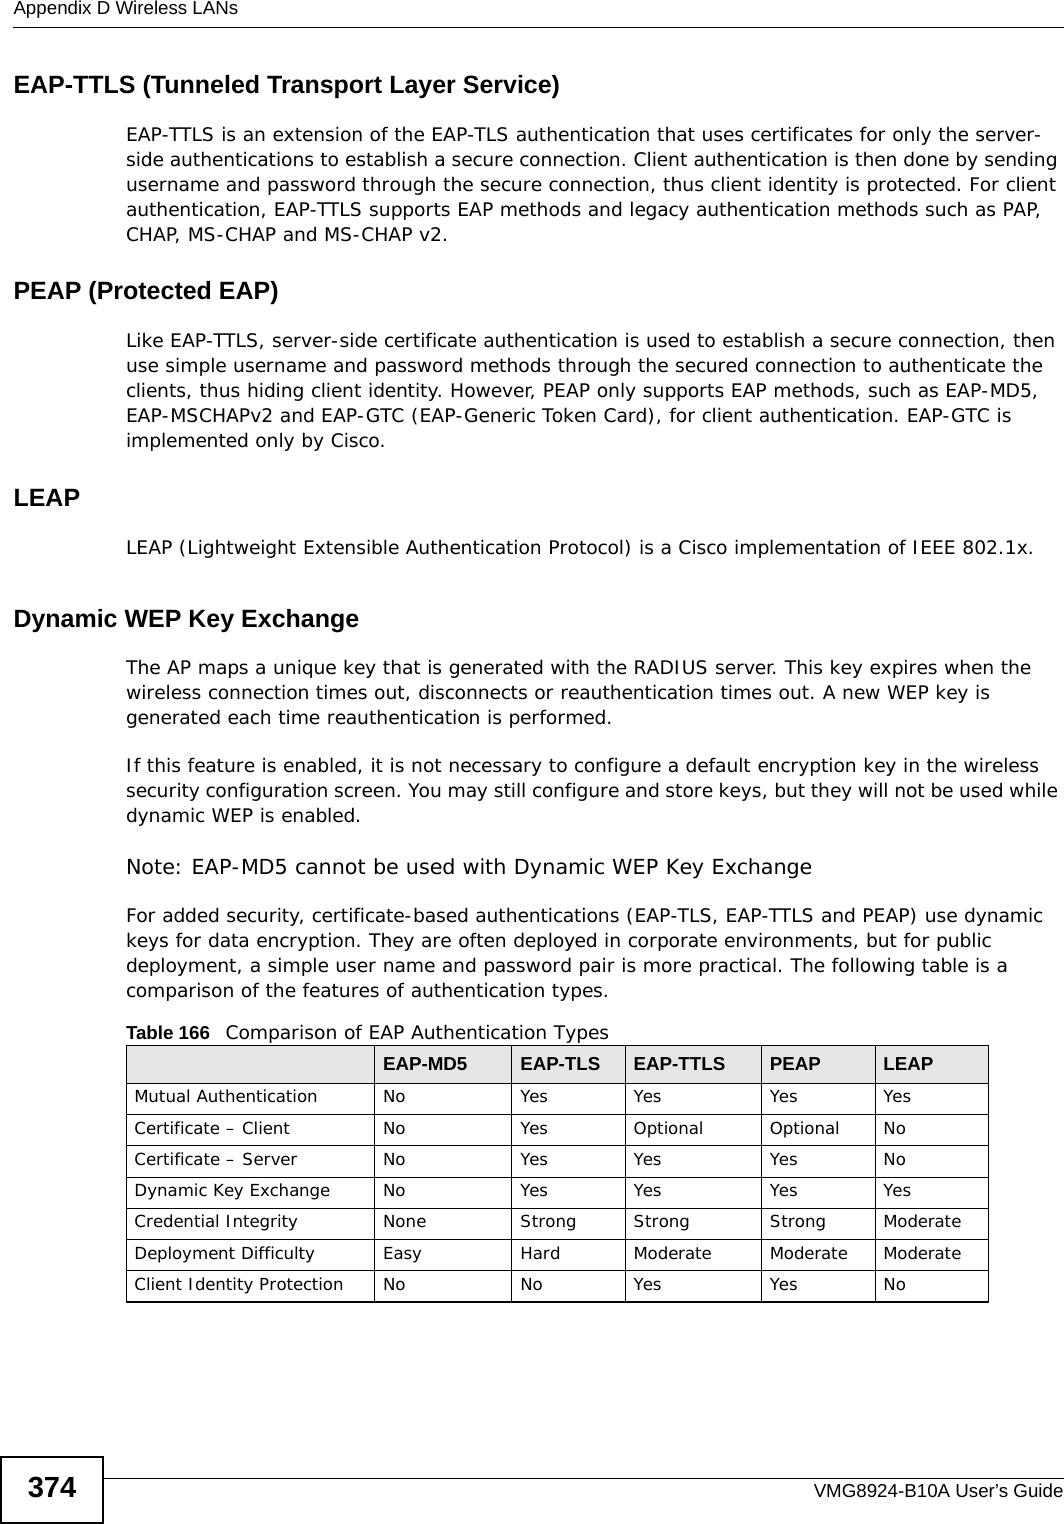 Appendix D Wireless LANsVMG8924-B10A User’s Guide374EAP-TTLS (Tunneled Transport Layer Service) EAP-TTLS is an extension of the EAP-TLS authentication that uses certificates for only the server-side authentications to establish a secure connection. Client authentication is then done by sending username and password through the secure connection, thus client identity is protected. For client authentication, EAP-TTLS supports EAP methods and legacy authentication methods such as PAP, CHAP, MS-CHAP and MS-CHAP v2. PEAP (Protected EAP)   Like EAP-TTLS, server-side certificate authentication is used to establish a secure connection, then use simple username and password methods through the secured connection to authenticate the clients, thus hiding client identity. However, PEAP only supports EAP methods, such as EAP-MD5, EAP-MSCHAPv2 and EAP-GTC (EAP-Generic Token Card), for client authentication. EAP-GTC is implemented only by Cisco.LEAPLEAP (Lightweight Extensible Authentication Protocol) is a Cisco implementation of IEEE 802.1x. Dynamic WEP Key ExchangeThe AP maps a unique key that is generated with the RADIUS server. This key expires when the wireless connection times out, disconnects or reauthentication times out. A new WEP key is generated each time reauthentication is performed.If this feature is enabled, it is not necessary to configure a default encryption key in the wireless security configuration screen. You may still configure and store keys, but they will not be used while dynamic WEP is enabled.Note: EAP-MD5 cannot be used with Dynamic WEP Key ExchangeFor added security, certificate-based authentications (EAP-TLS, EAP-TTLS and PEAP) use dynamic keys for data encryption. They are often deployed in corporate environments, but for public deployment, a simple user name and password pair is more practical. The following table is a comparison of the features of authentication types.Table 166   Comparison of EAP Authentication TypesEAP-MD5 EAP-TLS EAP-TTLS PEAP LEAPMutual Authentication No Yes Yes Yes YesCertificate – Client No Yes Optional Optional NoCertificate – Server No Yes Yes Yes NoDynamic Key Exchange No Yes Yes Yes YesCredential Integrity None Strong Strong Strong ModerateDeployment Difficulty Easy Hard Moderate Moderate ModerateClient Identity Protection No No Yes Yes No